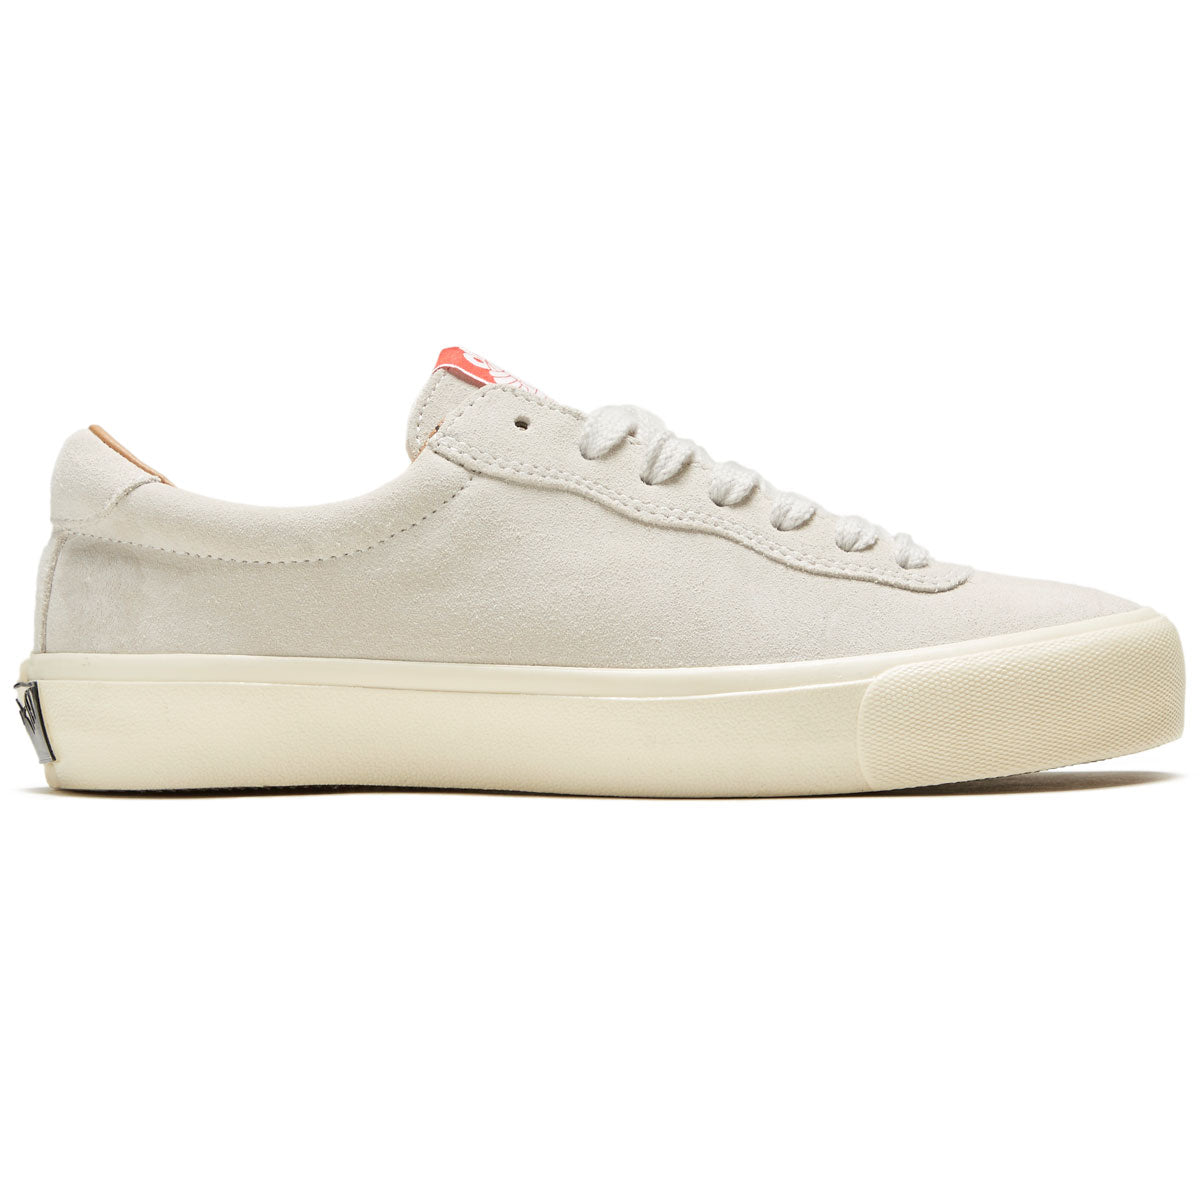 Last Resort AB VM001 Suede Lo Shoes - White/White image 1